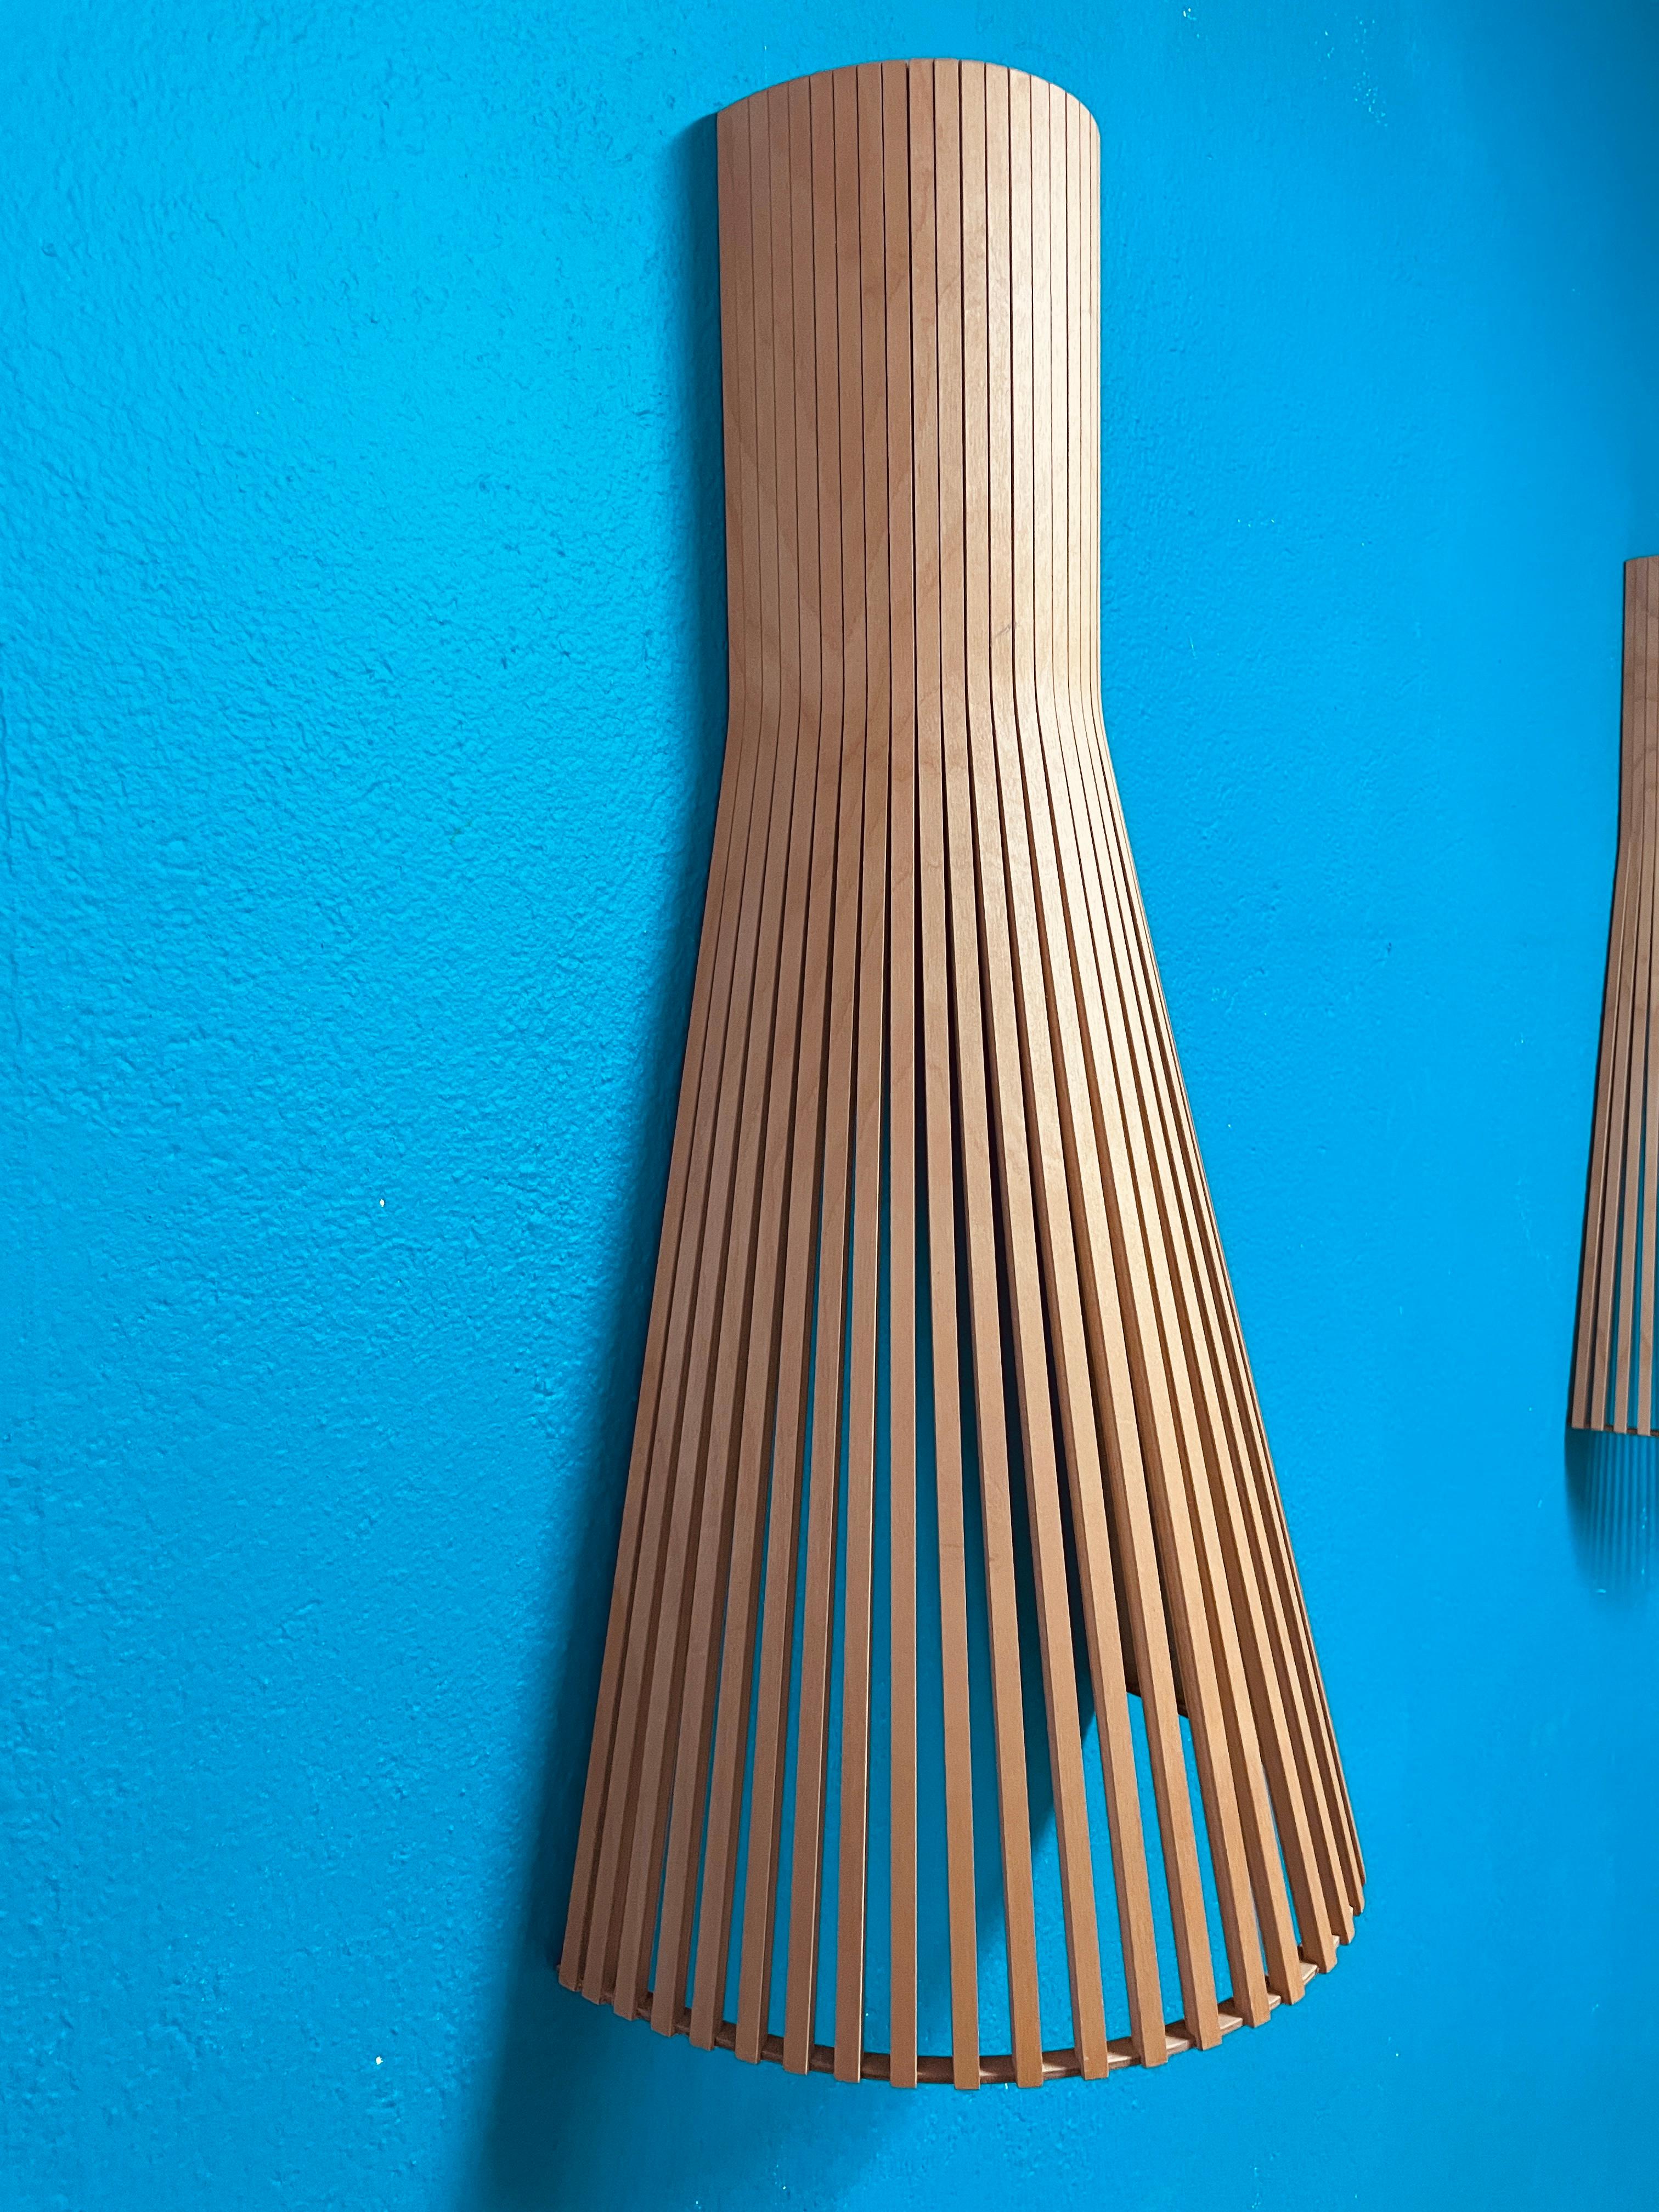 Birch Pair of Wooden Secto 4230 Wall Lamps by Secto Design Finland